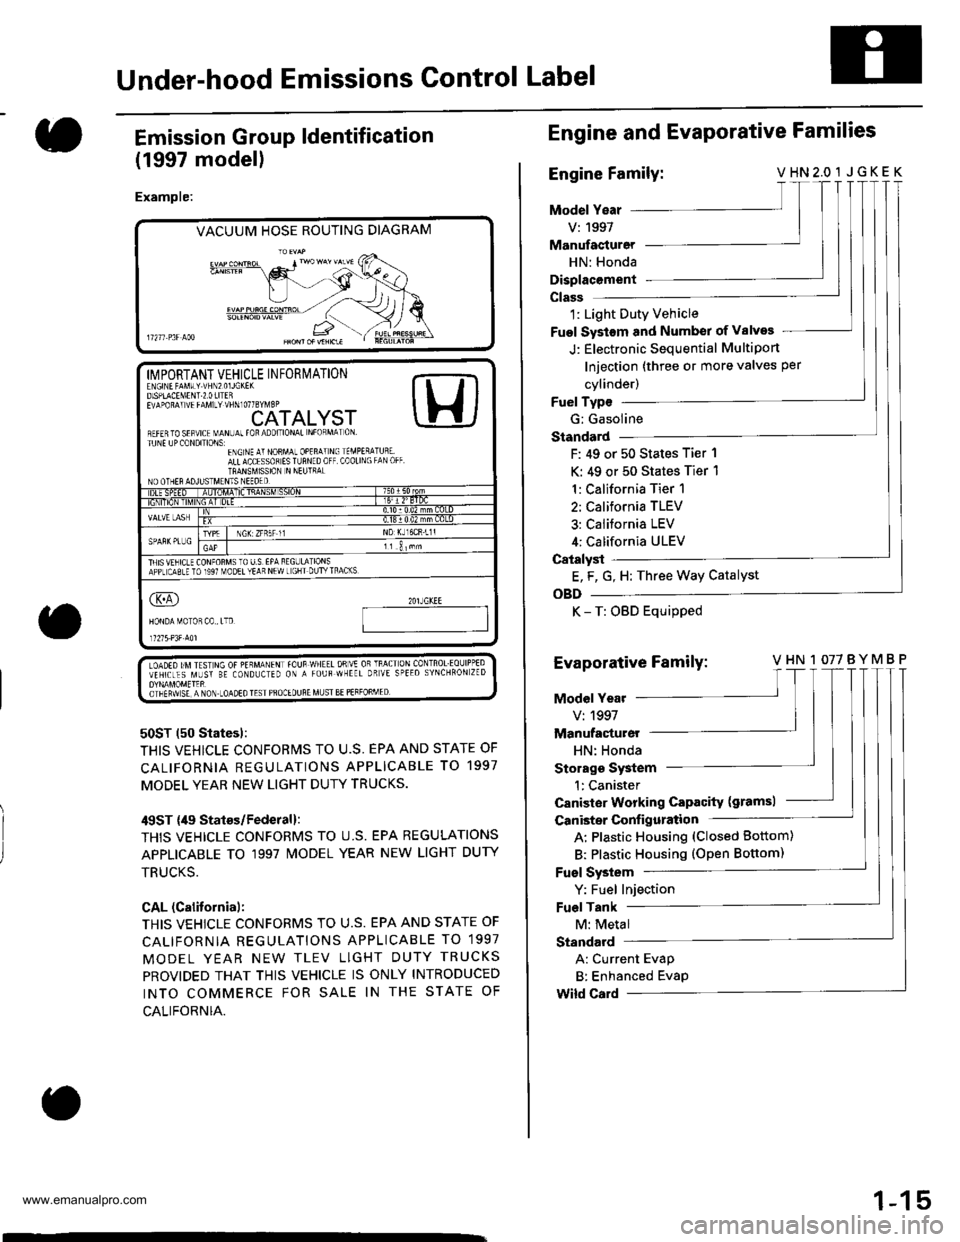 HONDA CR-V 1998 RD1-RD3 / 1.G Workshop Manual 
Under-hood Emissions Control Label
Emission Group ldentification
(1997 modell
Example:
VACUUM HOSE ROUTING DIAGRAM
LOADED IM TEST]NG OF PERMANENT fOUB WHEEL OSVE OR TRACT ON CONTROLEOLJIPPEDVEHTCLES